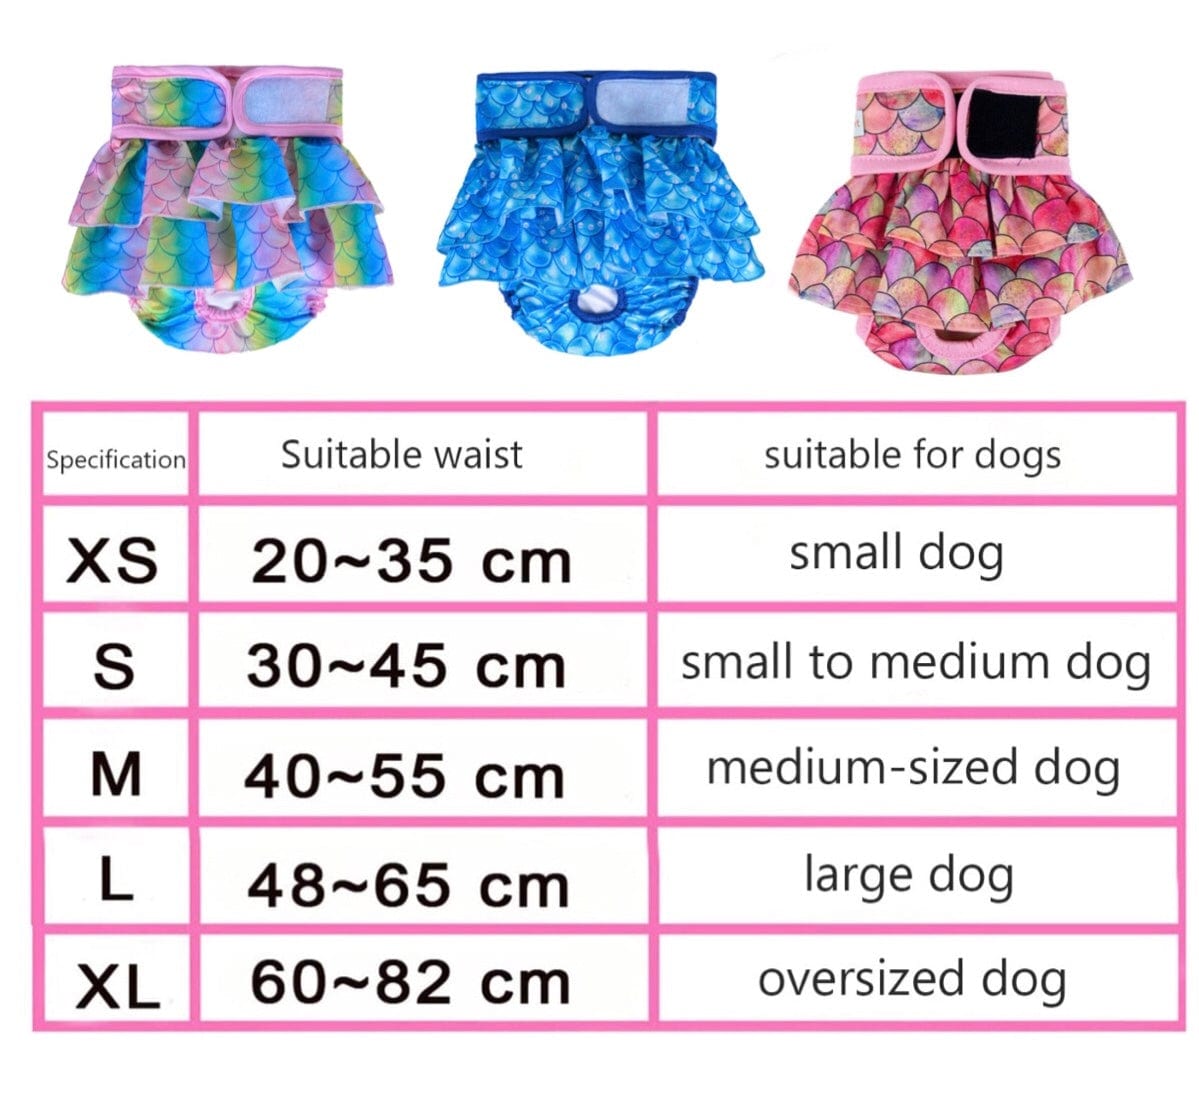 KUTKUT Female Dog Adjustable Diapers Reusable Washable Super Absorbency Leak-Proof Animal Pattern Nappie Dress for Dogs in Heat, Period or Excitable Urination, Sanitary Panties (Multicolor) -